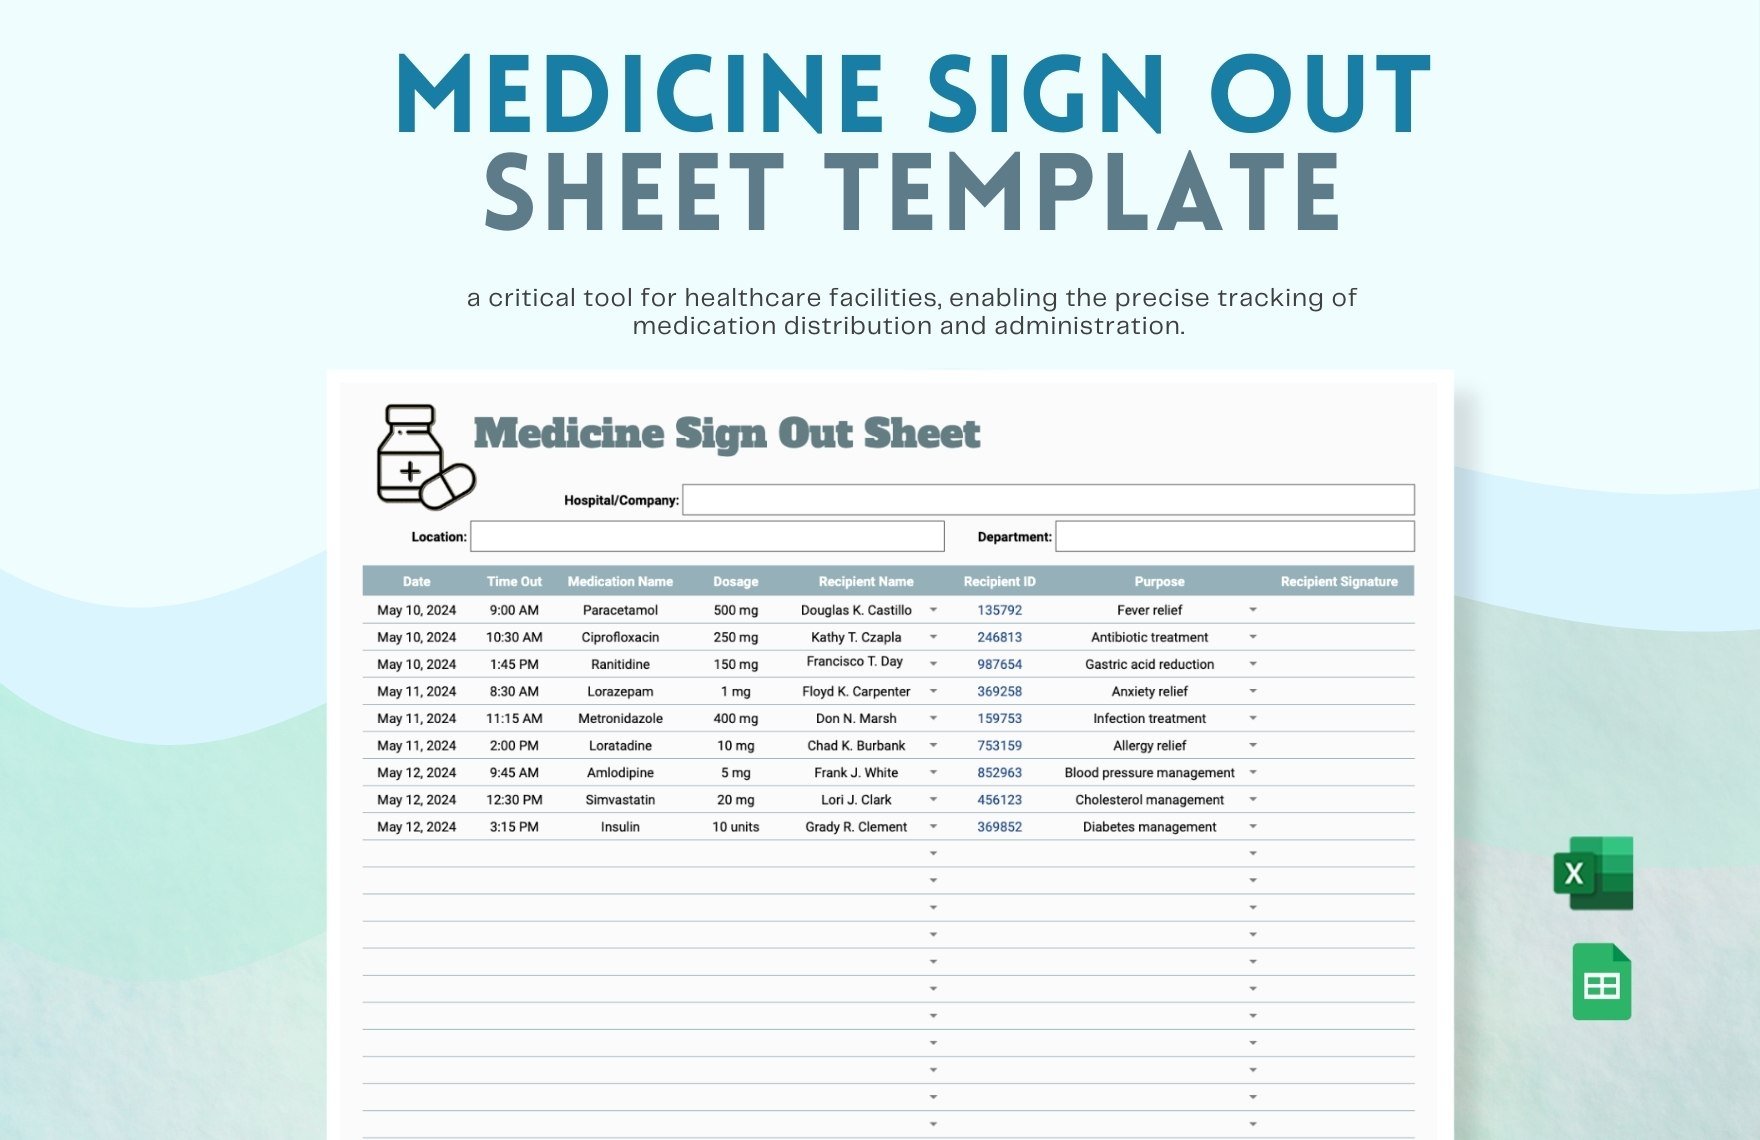 Medicine Sign Out Sheet Template in Excel, Google Sheets